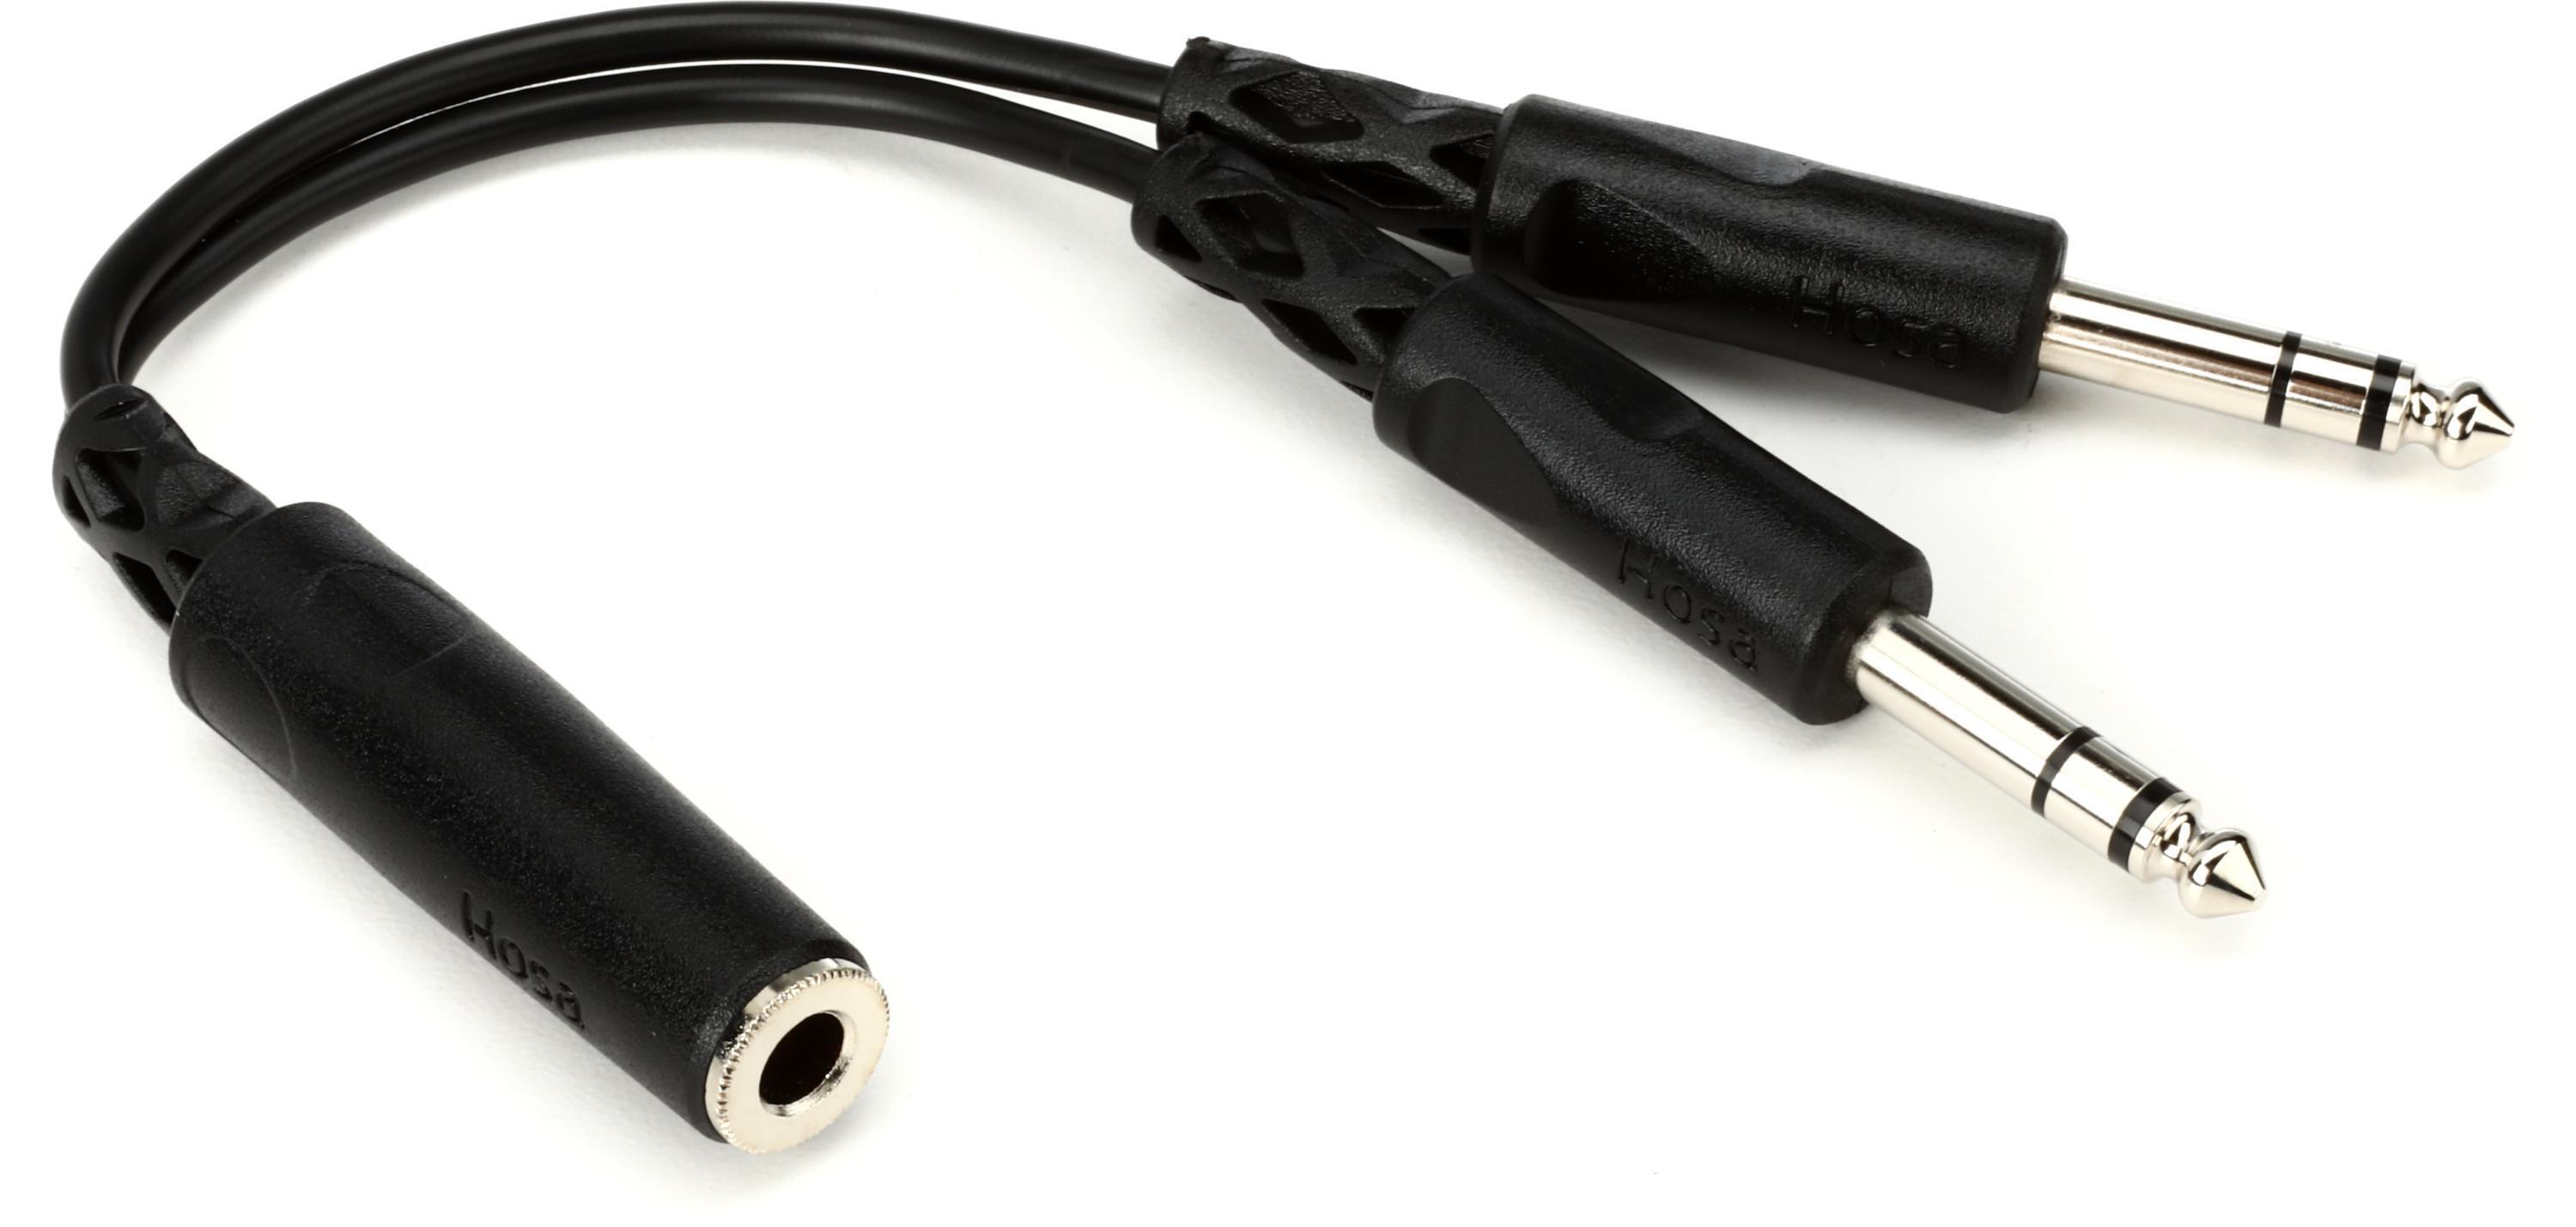 Hosa YPP-308 Y Cable - 1/4 inch TRS Female to Dual 1/4 inch TRS Male